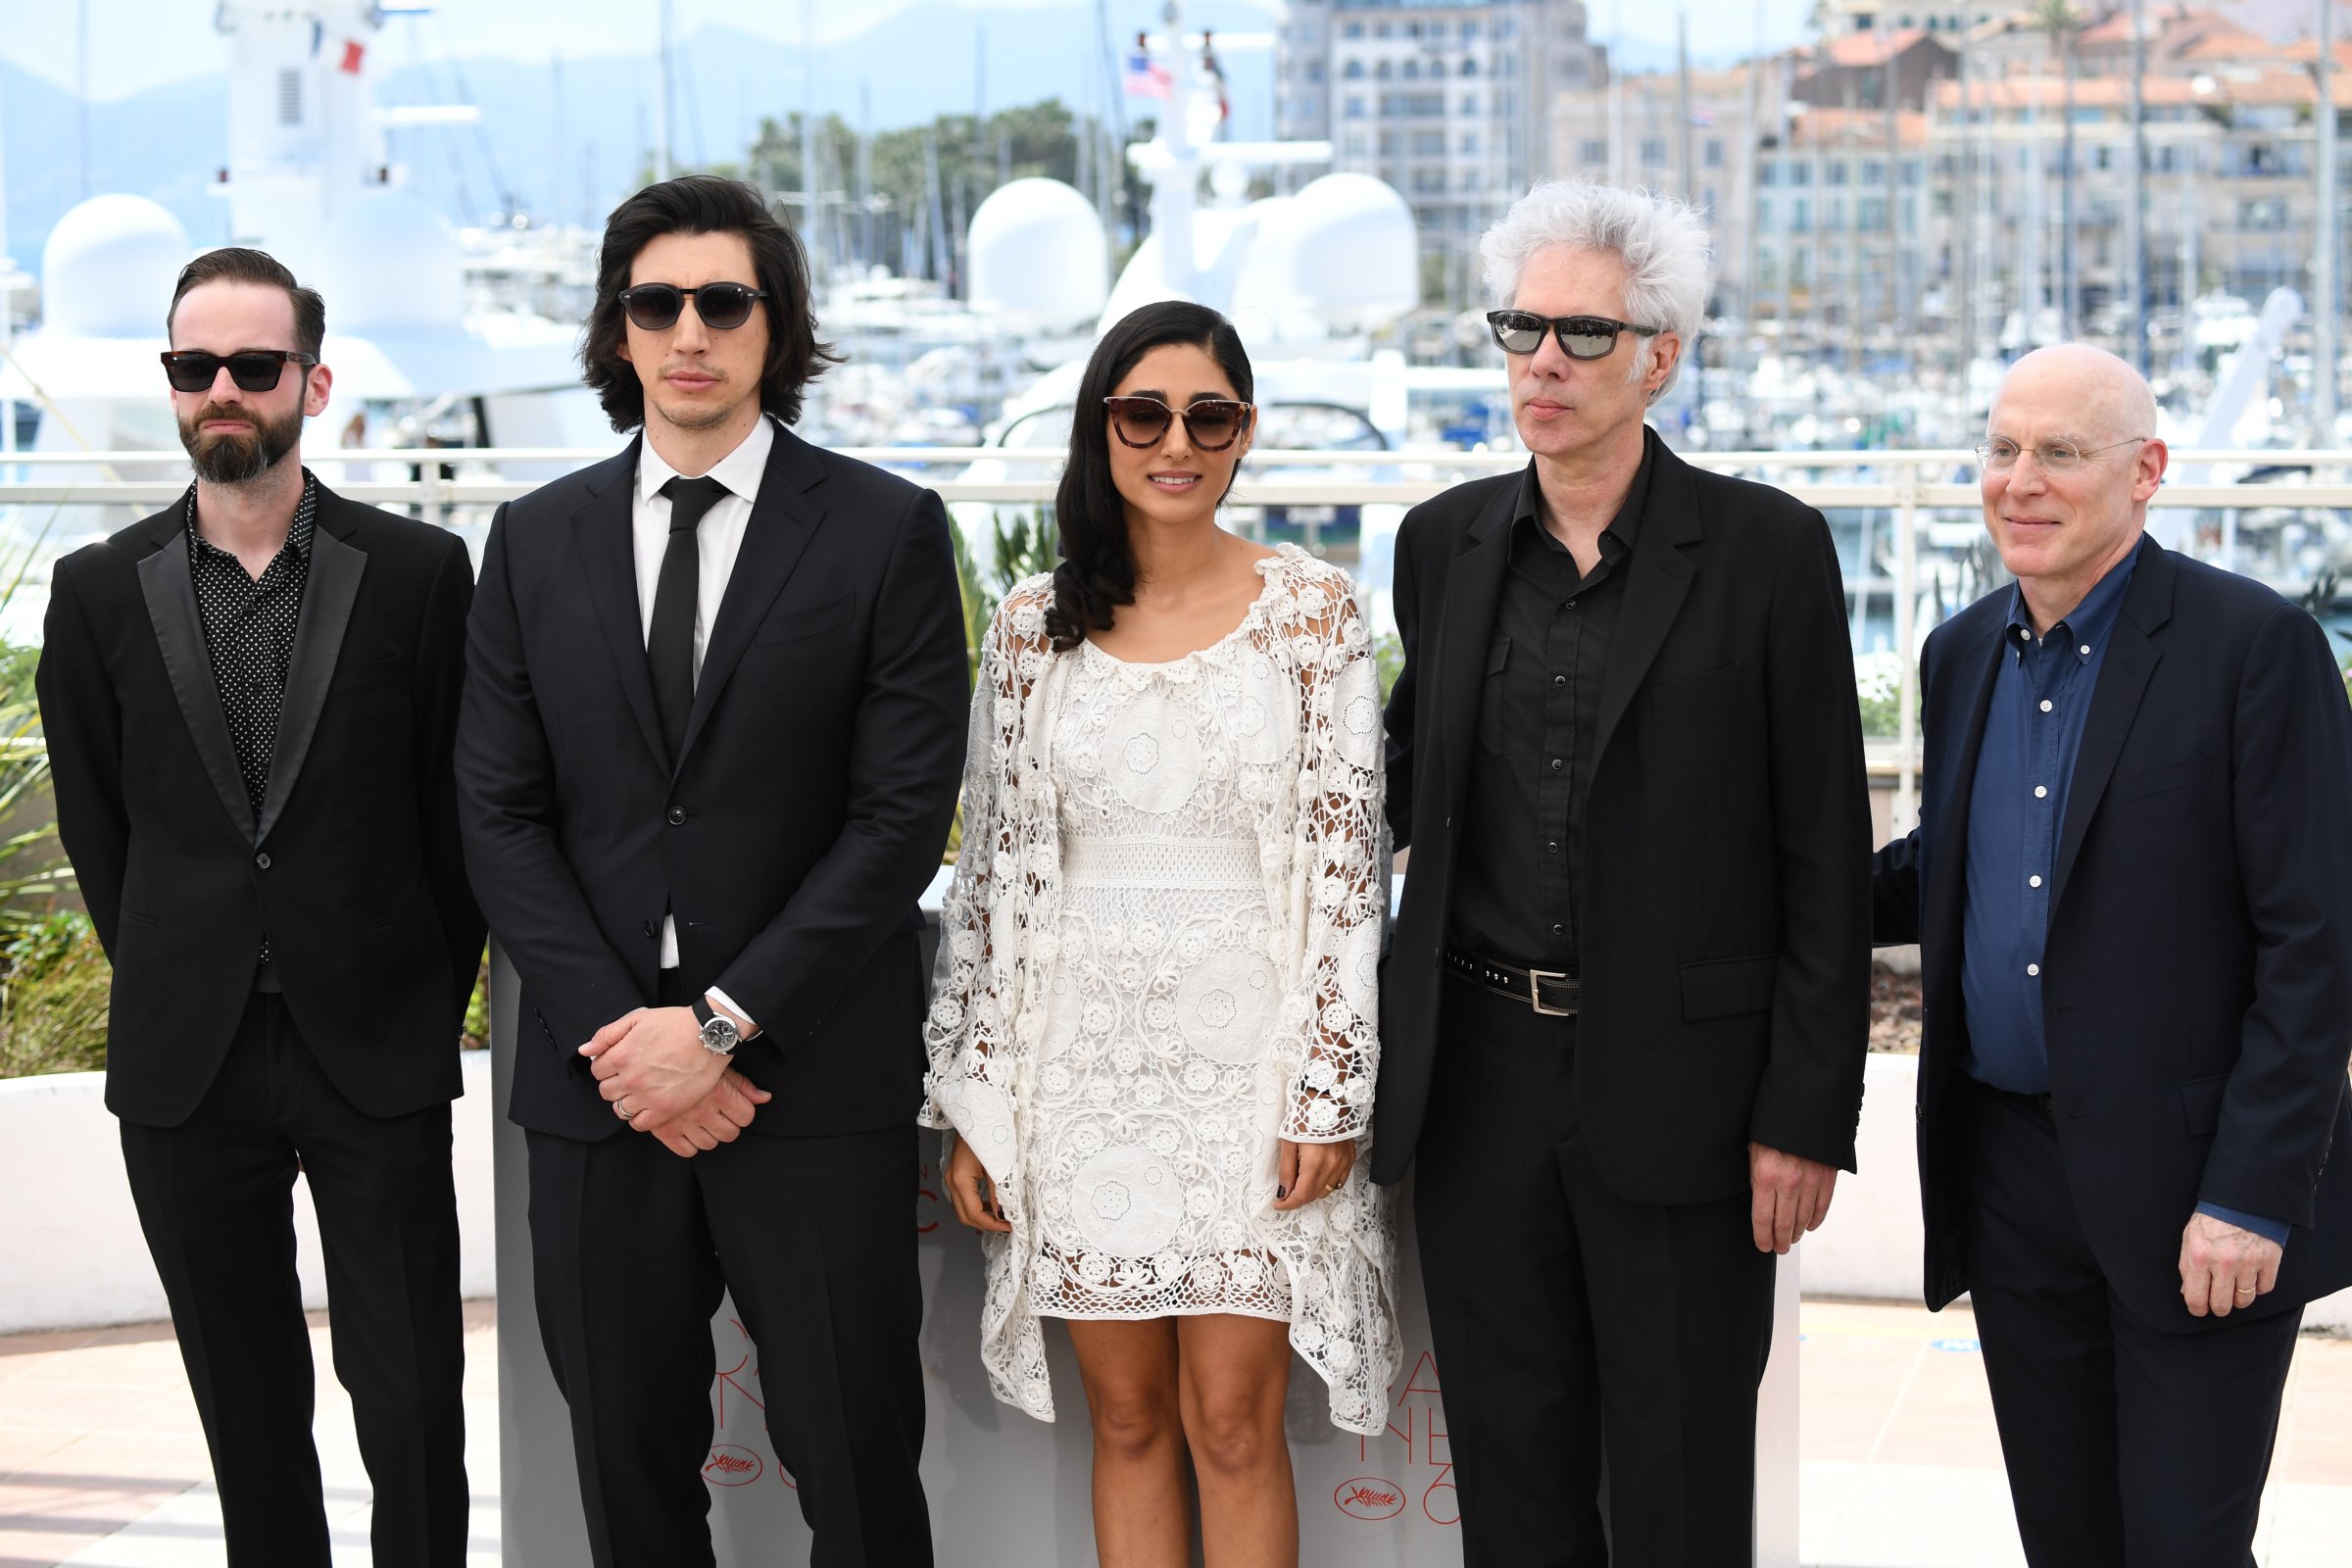 From left: Carter Logan, Adam Driver, Golshifteh Farahani, Jim Jarmusch, and Joshua Astrachan during the 69th annual Cannes Film Festival on May 16, 2016 in Cannes, France.